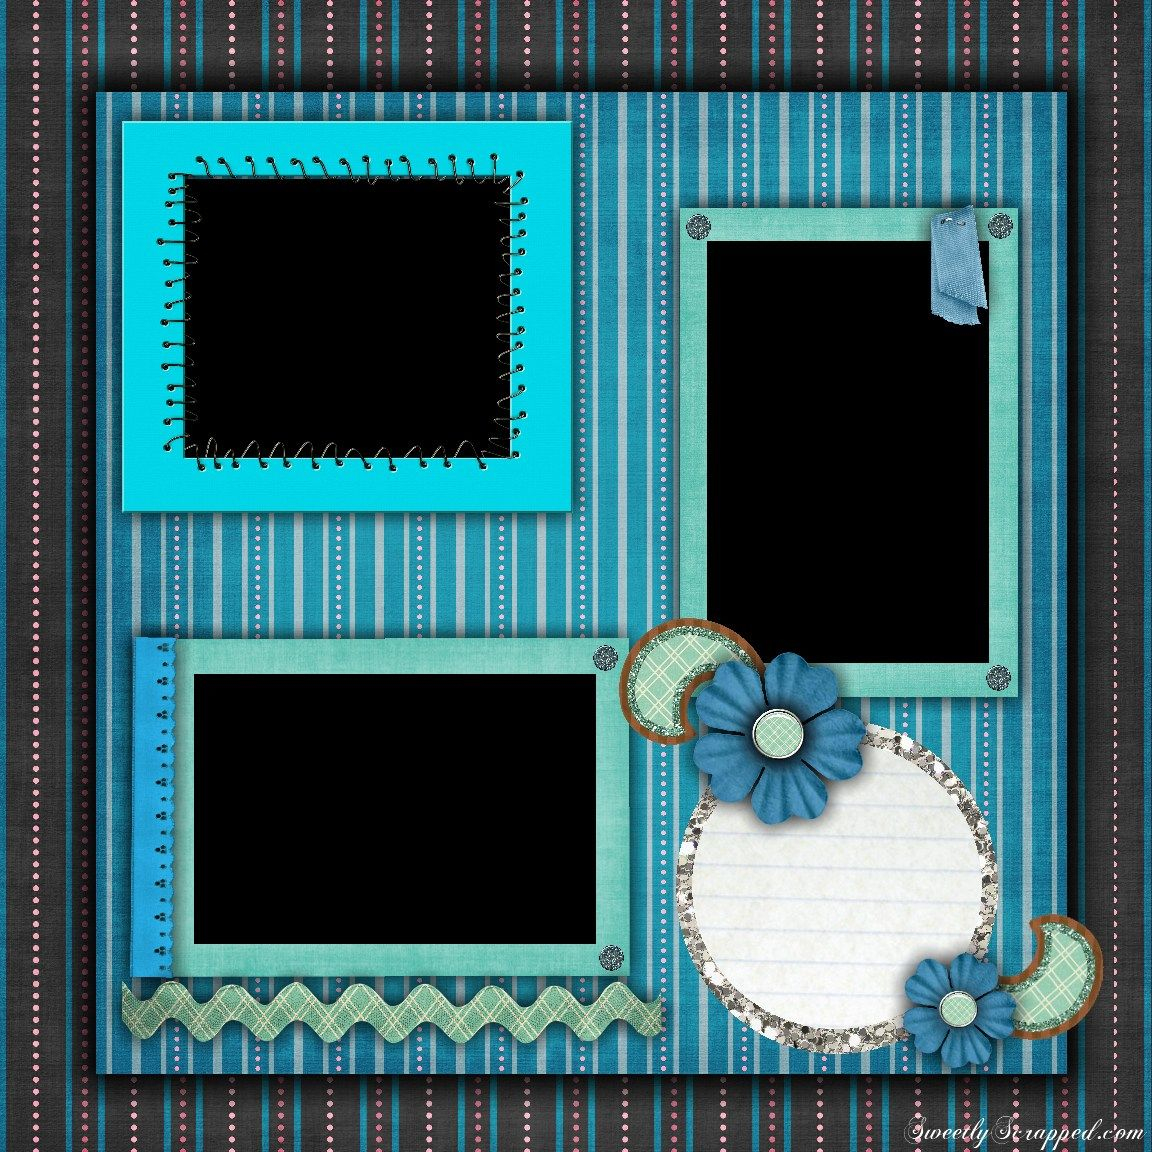 Scrapbooking Layouts Ideas Templates Free Printable Scrapbook Layout - Free Printable Scrapbook Page Designs